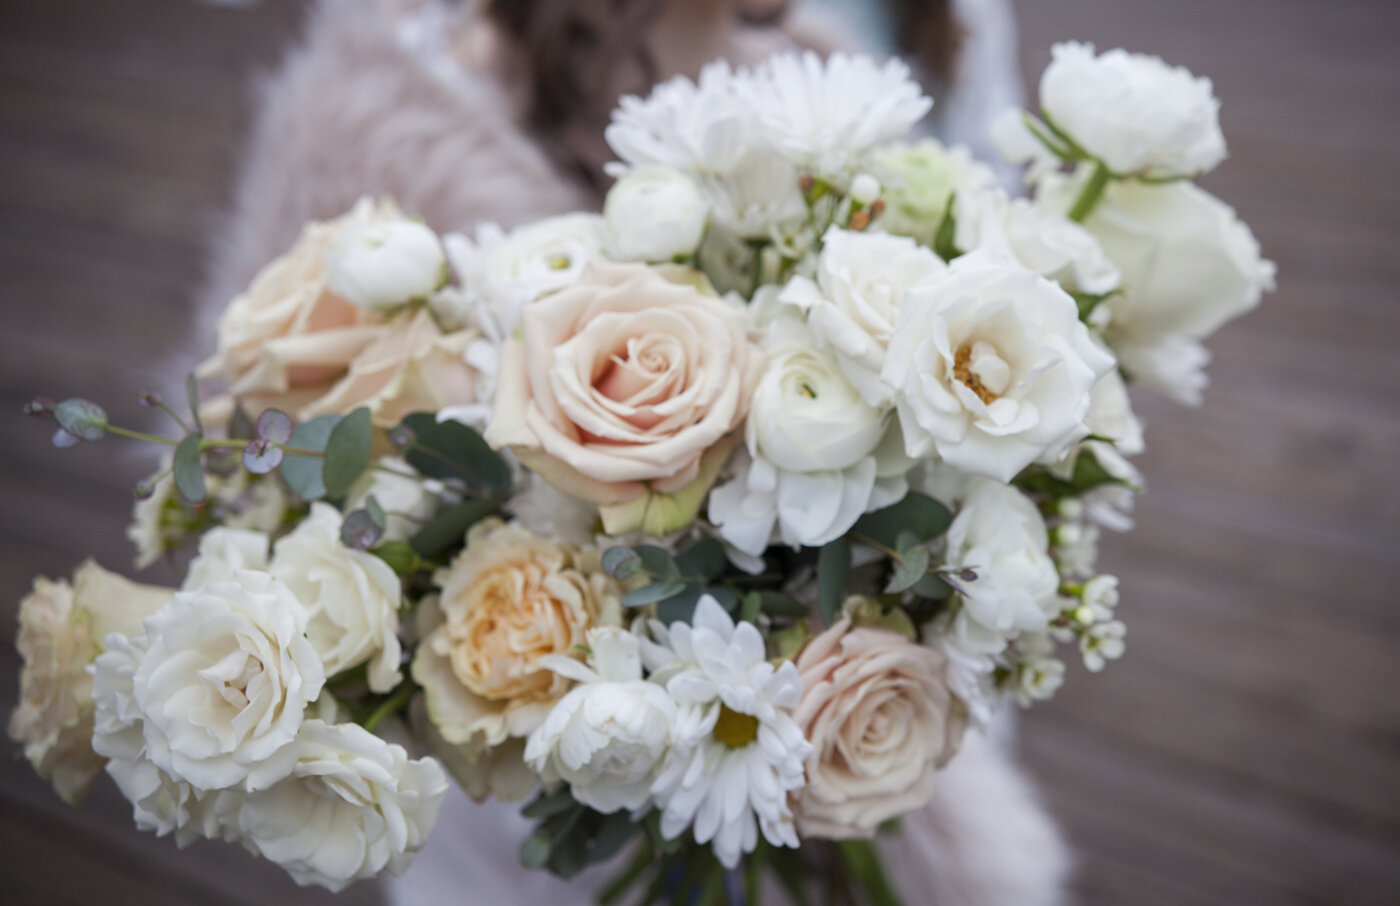 Seattle waterfront wedding with daisies by Bond in Bloom.jpg